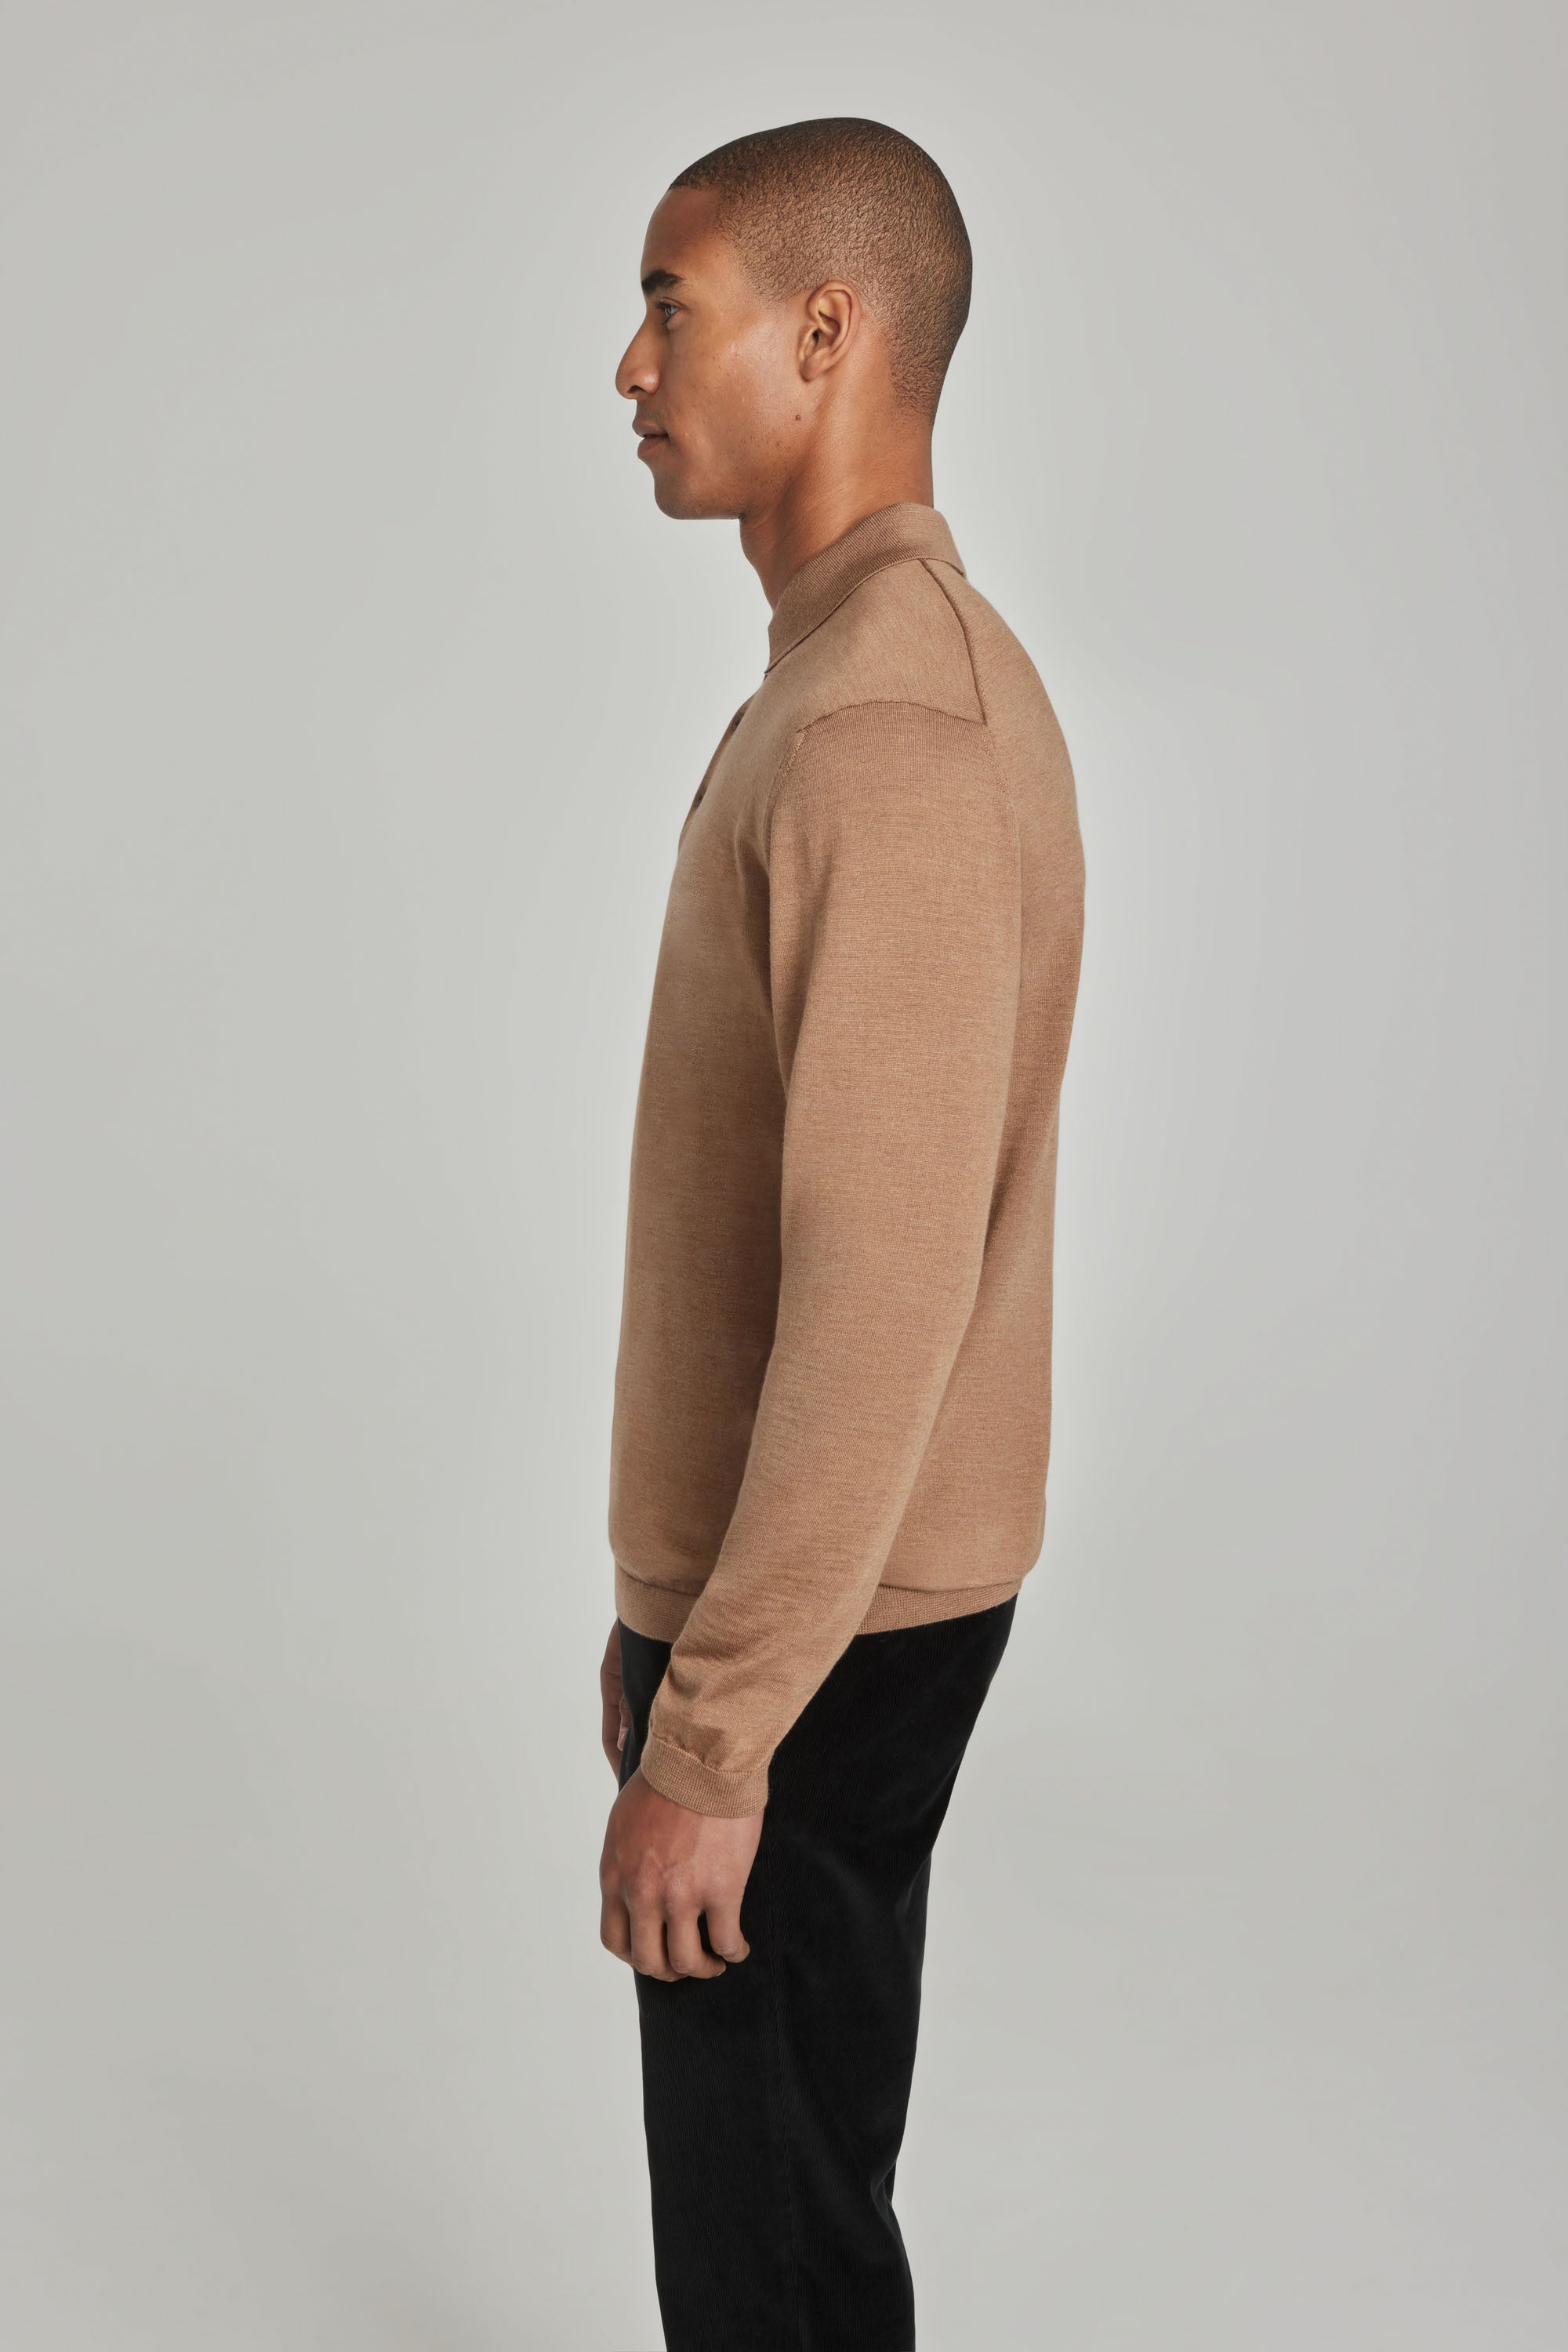 Redfern Vicuna Wool, Silk and Cashmere Long Sleeve Polo